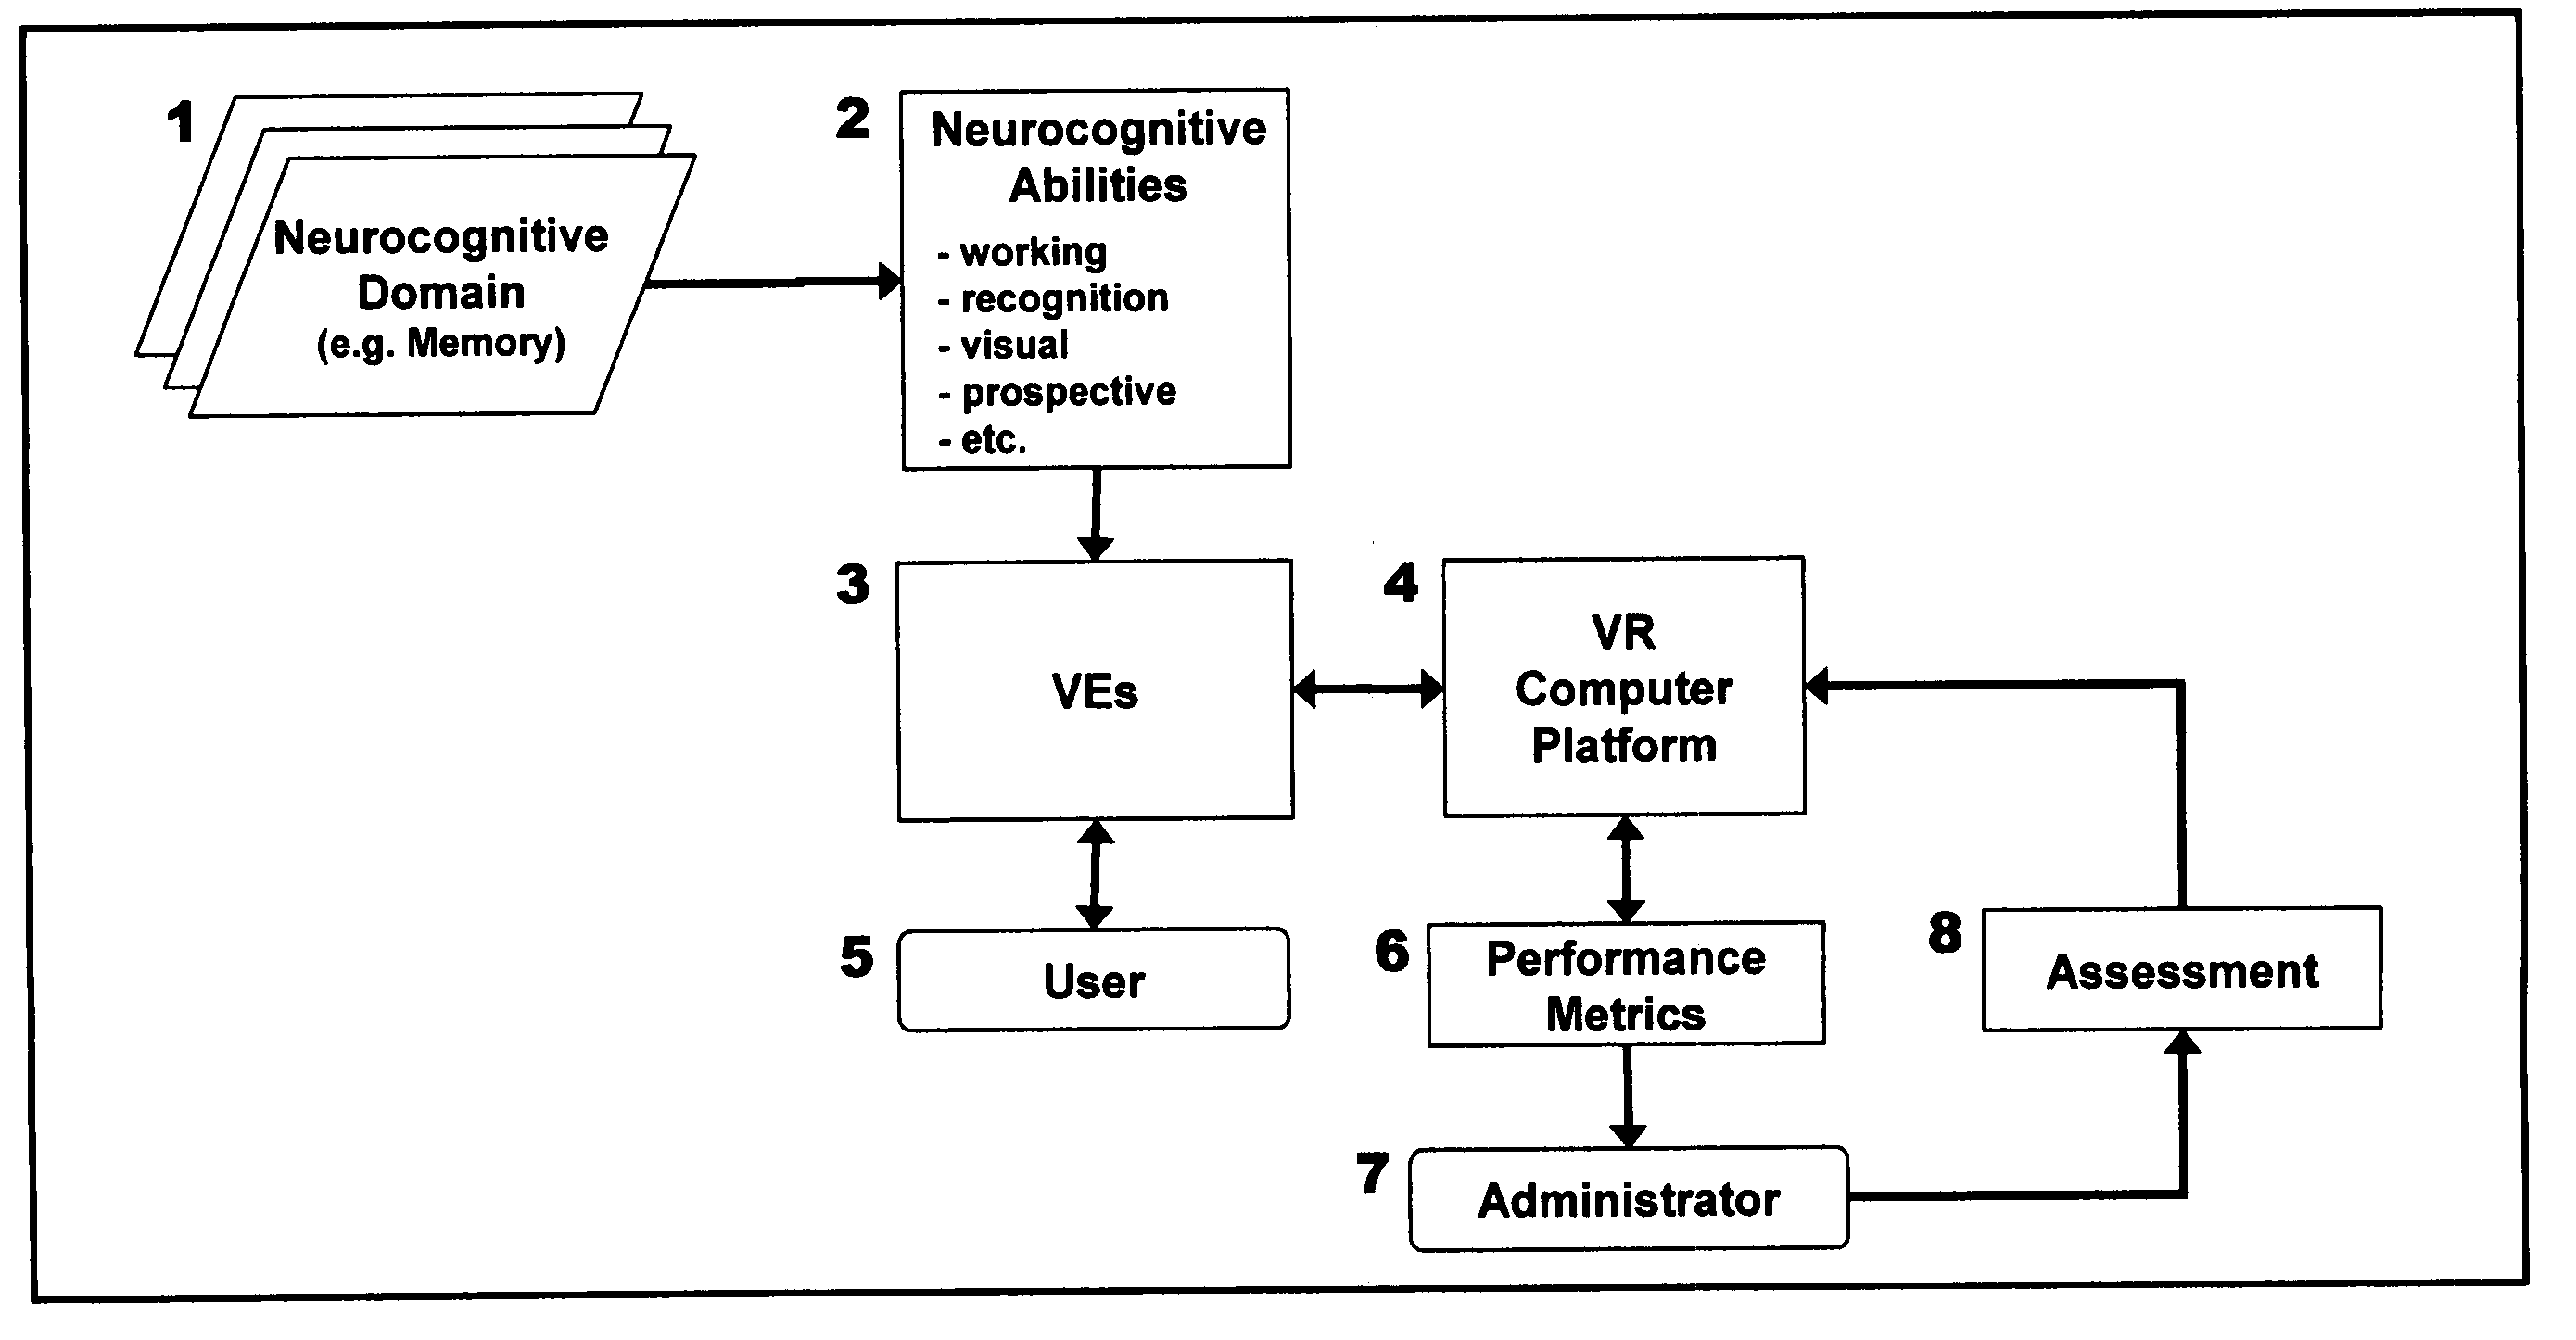 Computer-simulated virtual reality environments for evaluation of neurobehavioral performance